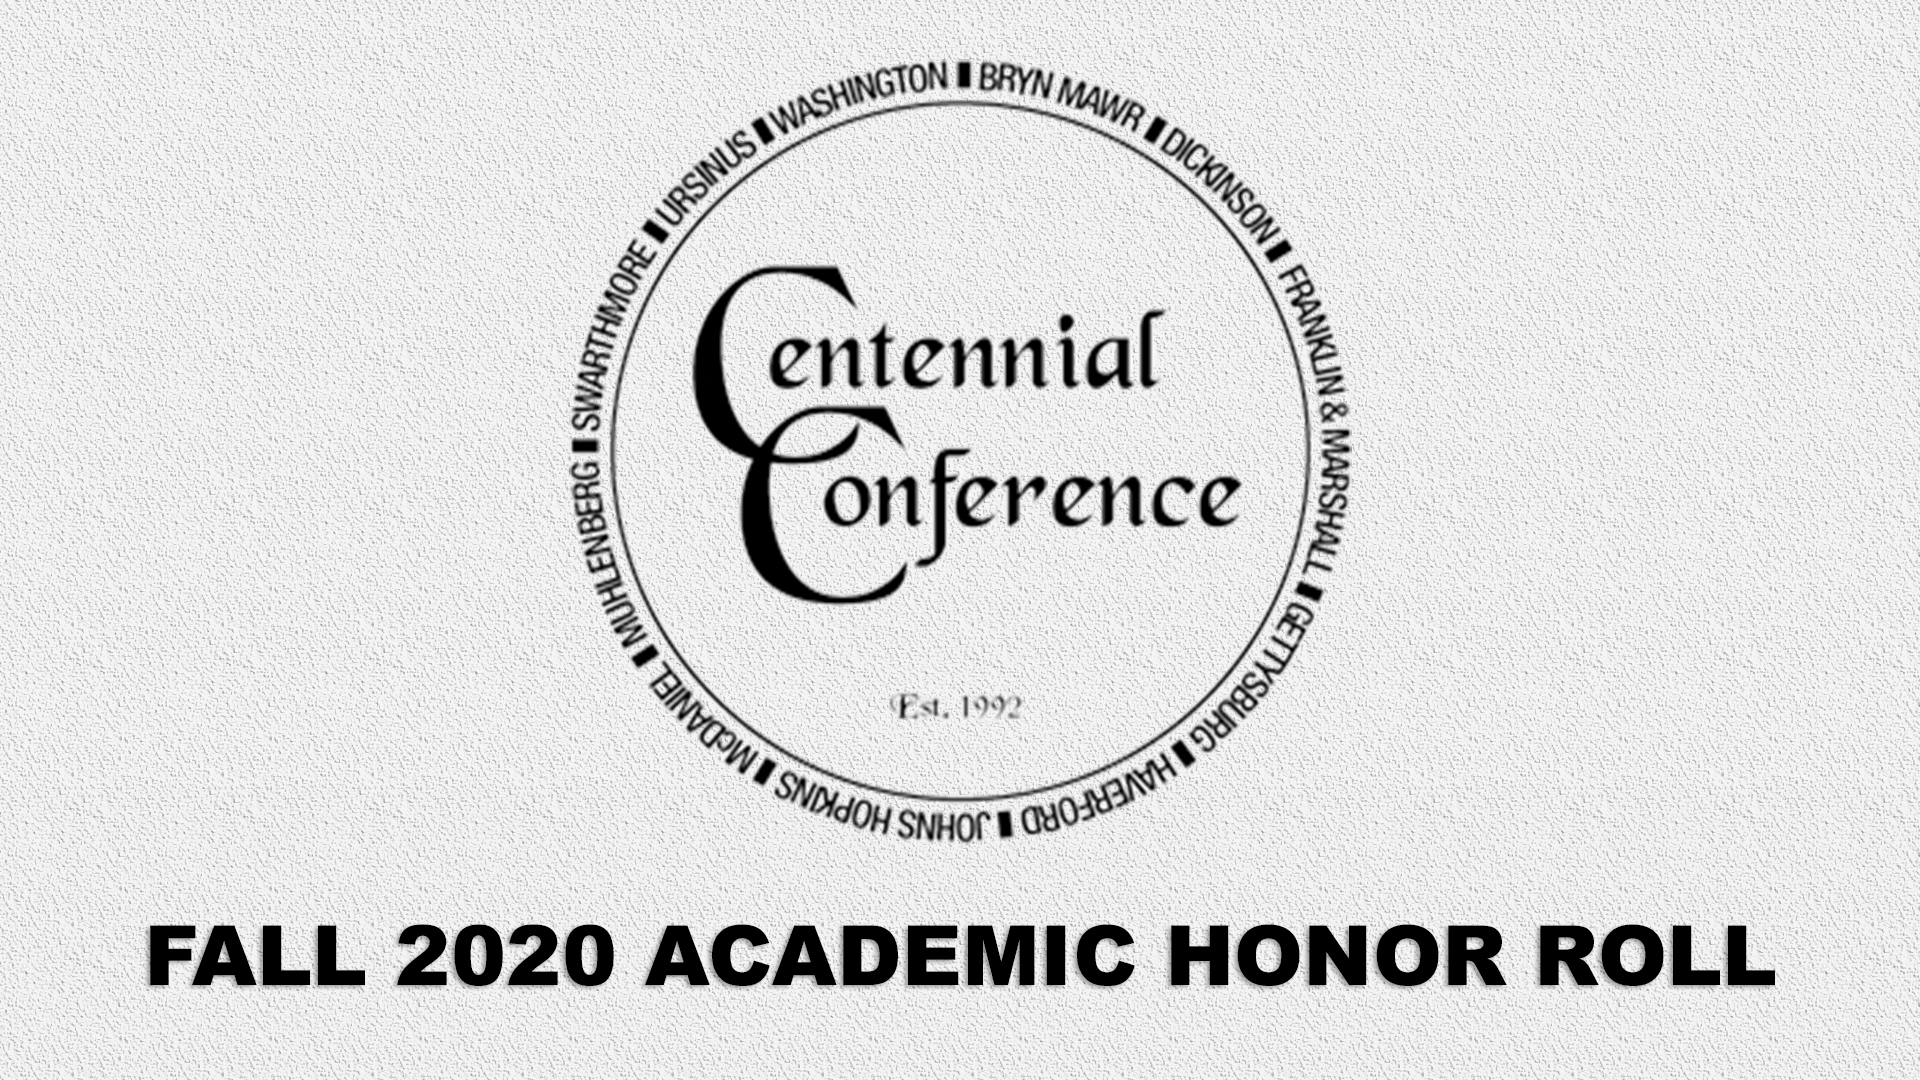 Centennial Conference Announces 2020 Fall Academic Honor Roll